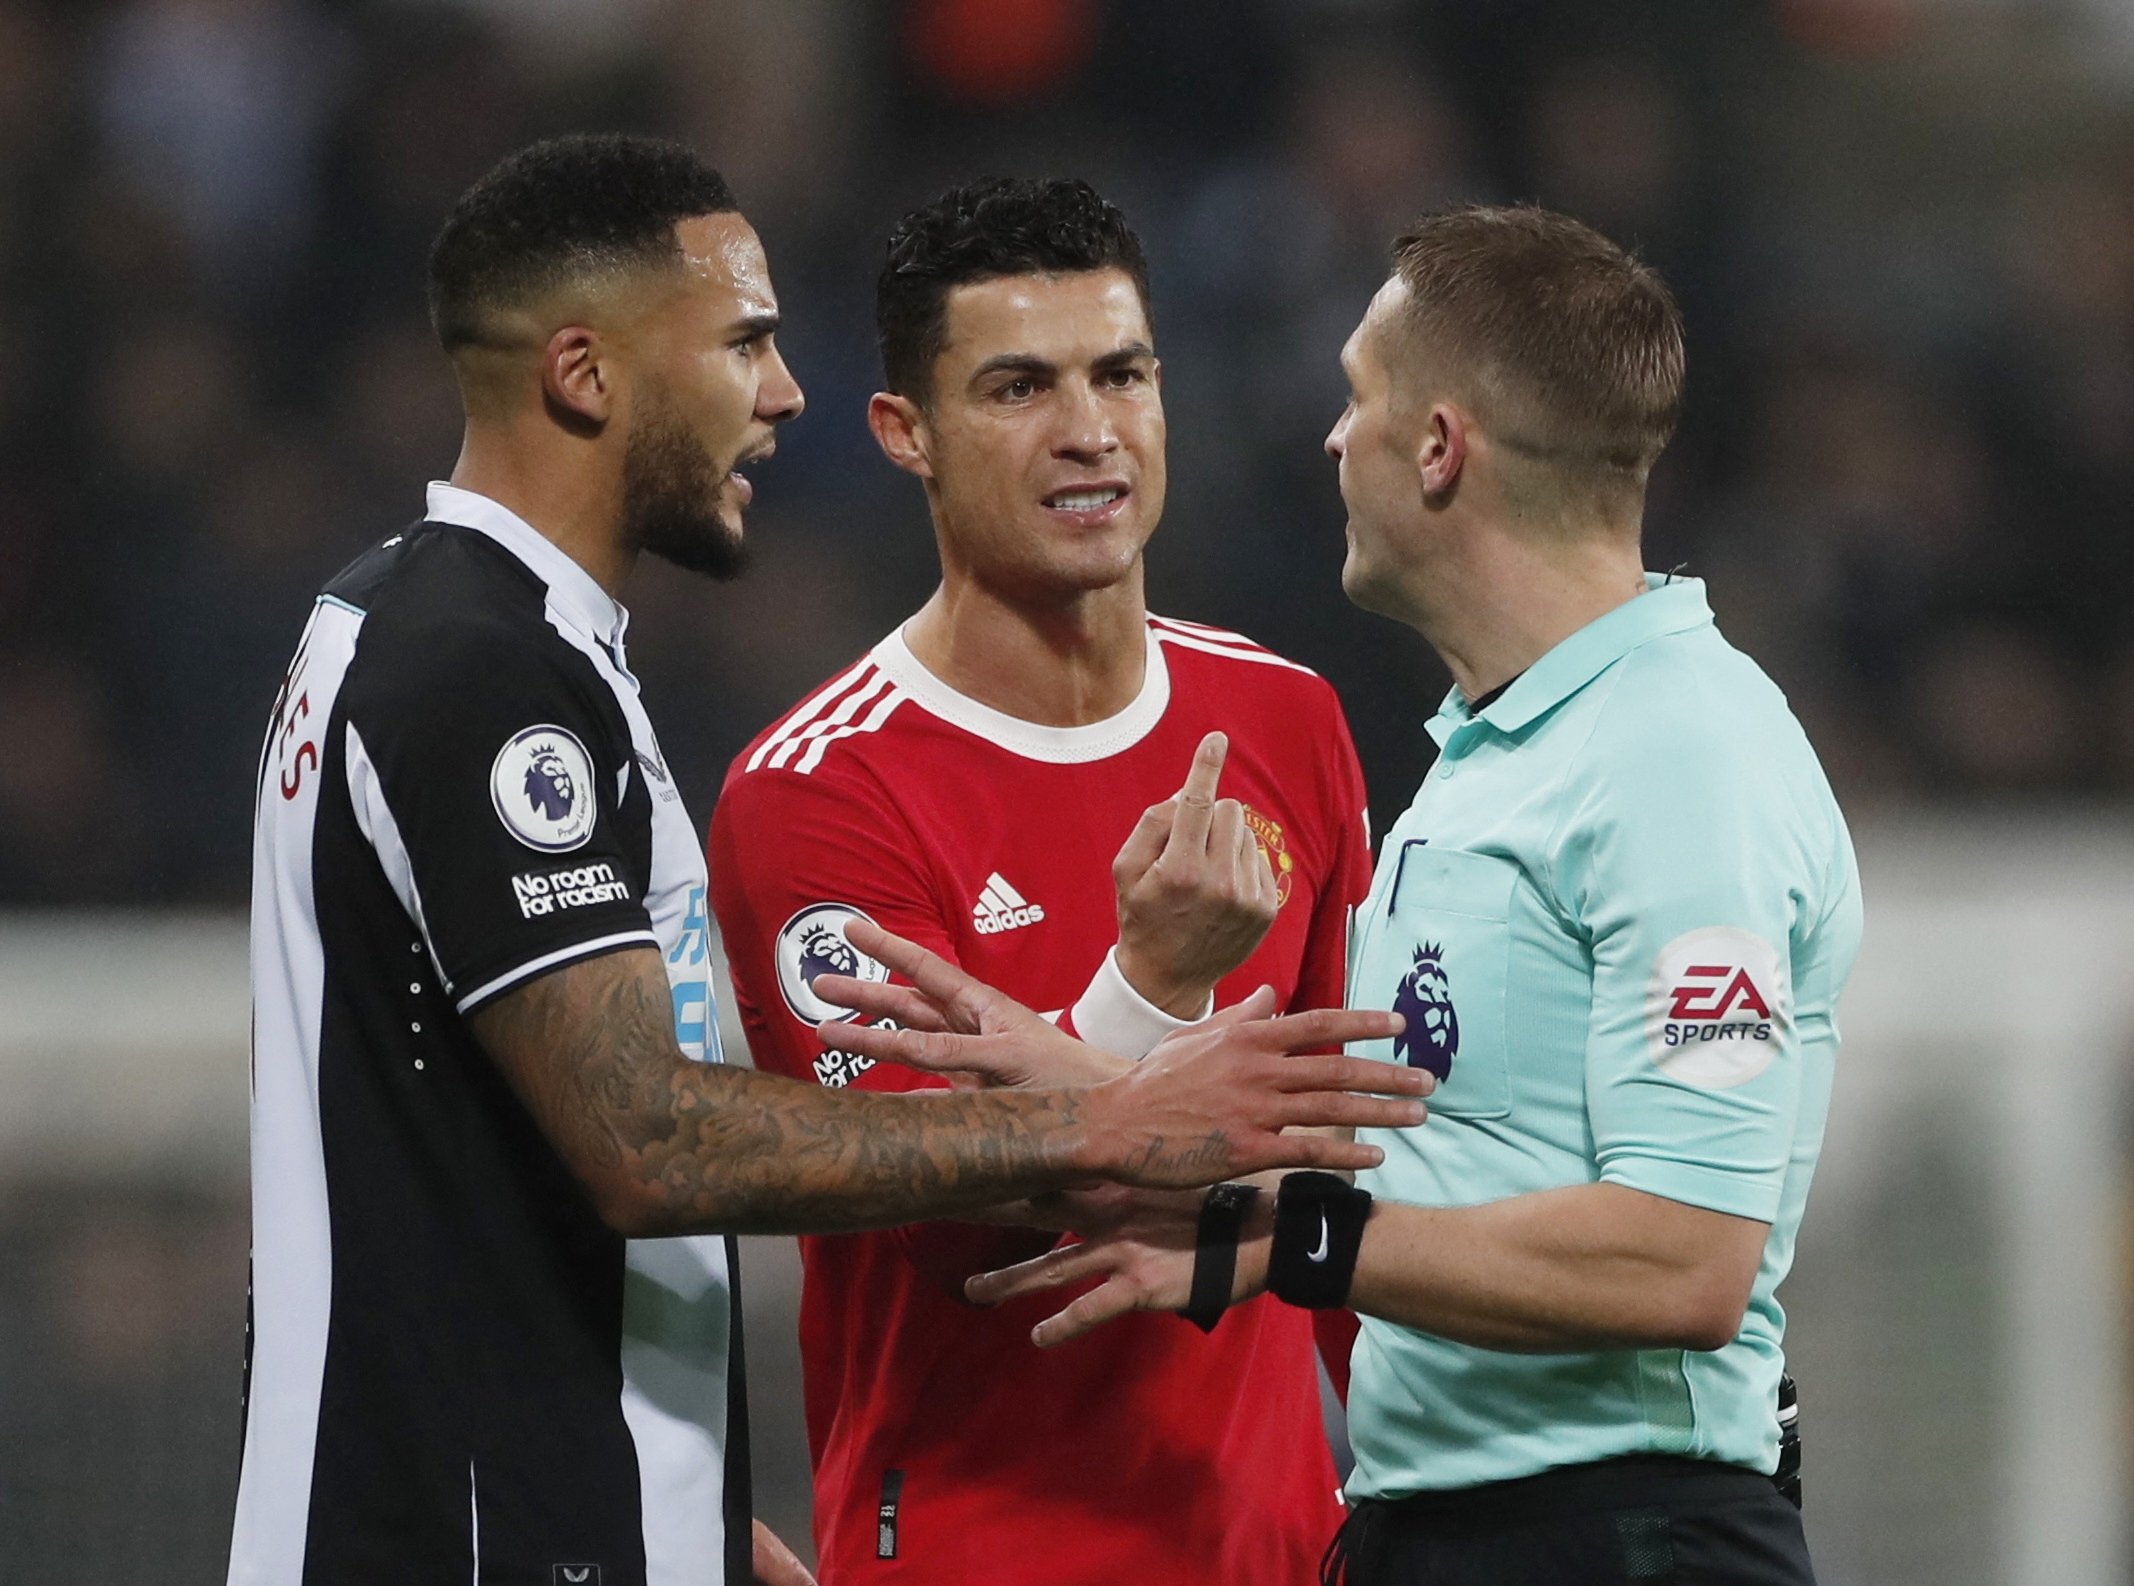 Man Utd's Cristiano Ronaldo (C) with referee Craig Pawson and Newcastle United's Jamaal Lascelles in a Premier League game against Newcastle at St. James' Park, Newcastle, England, Dec. 27, 2021. (Reuters Photo)